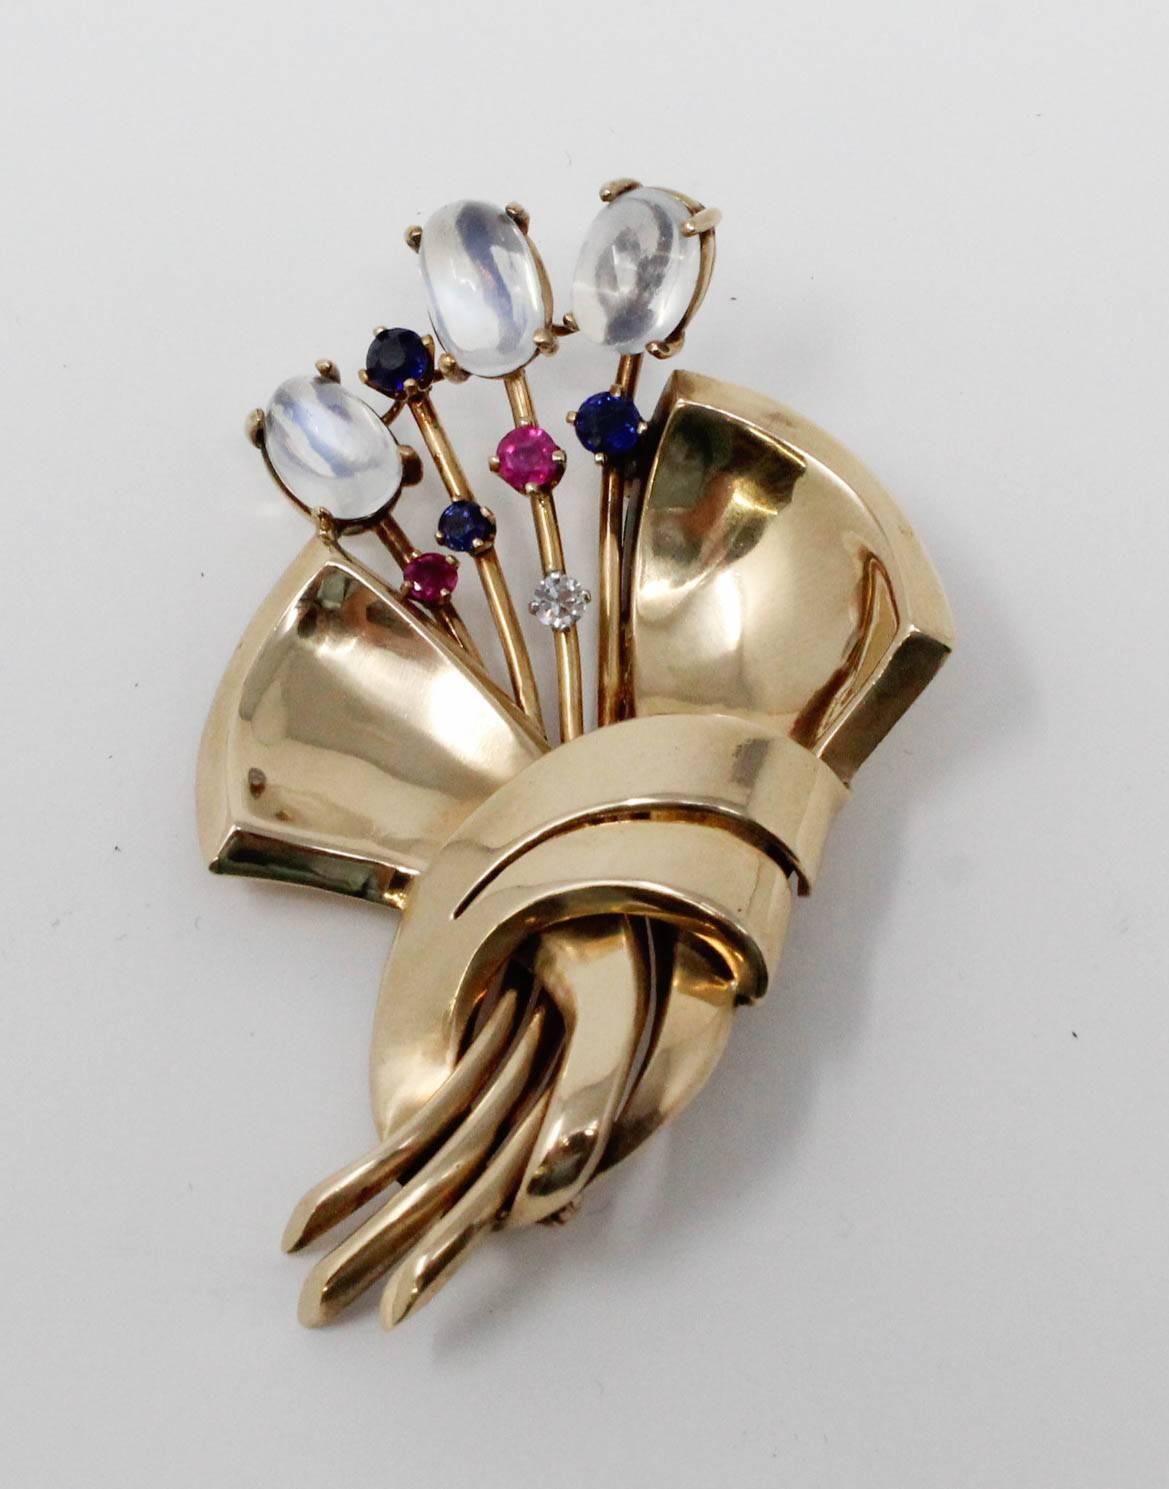 1940's Retro brooch of fourteen karat yellow gold with gemstones. There are a total of three moonstones, three sapphires, two rubies and a single diamond.